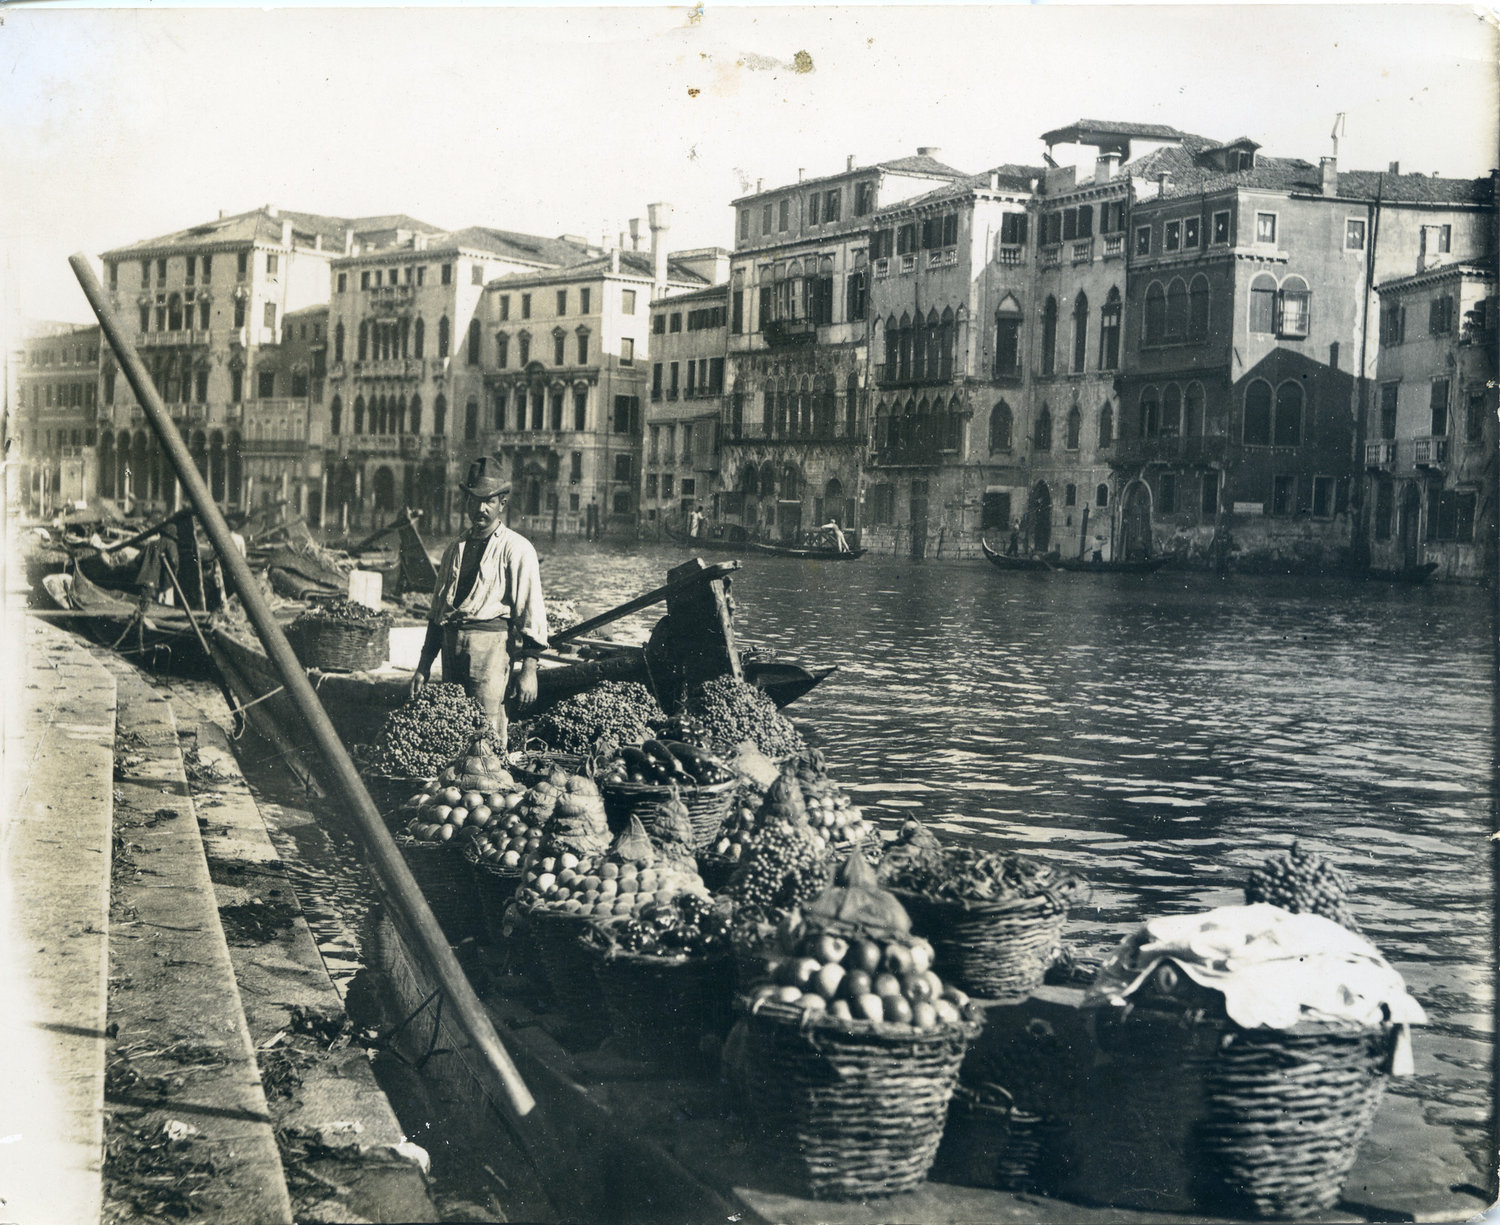 While visiting the grand canal of Venice in 1898, Fairchild photographed the fresh fruits and vegetables that were the earlier conquests of European plant explorers who brought them back from the New World. Items like tomatoes, onions, and squashes, like those pictured here, became central ingredients in Italian cooking.